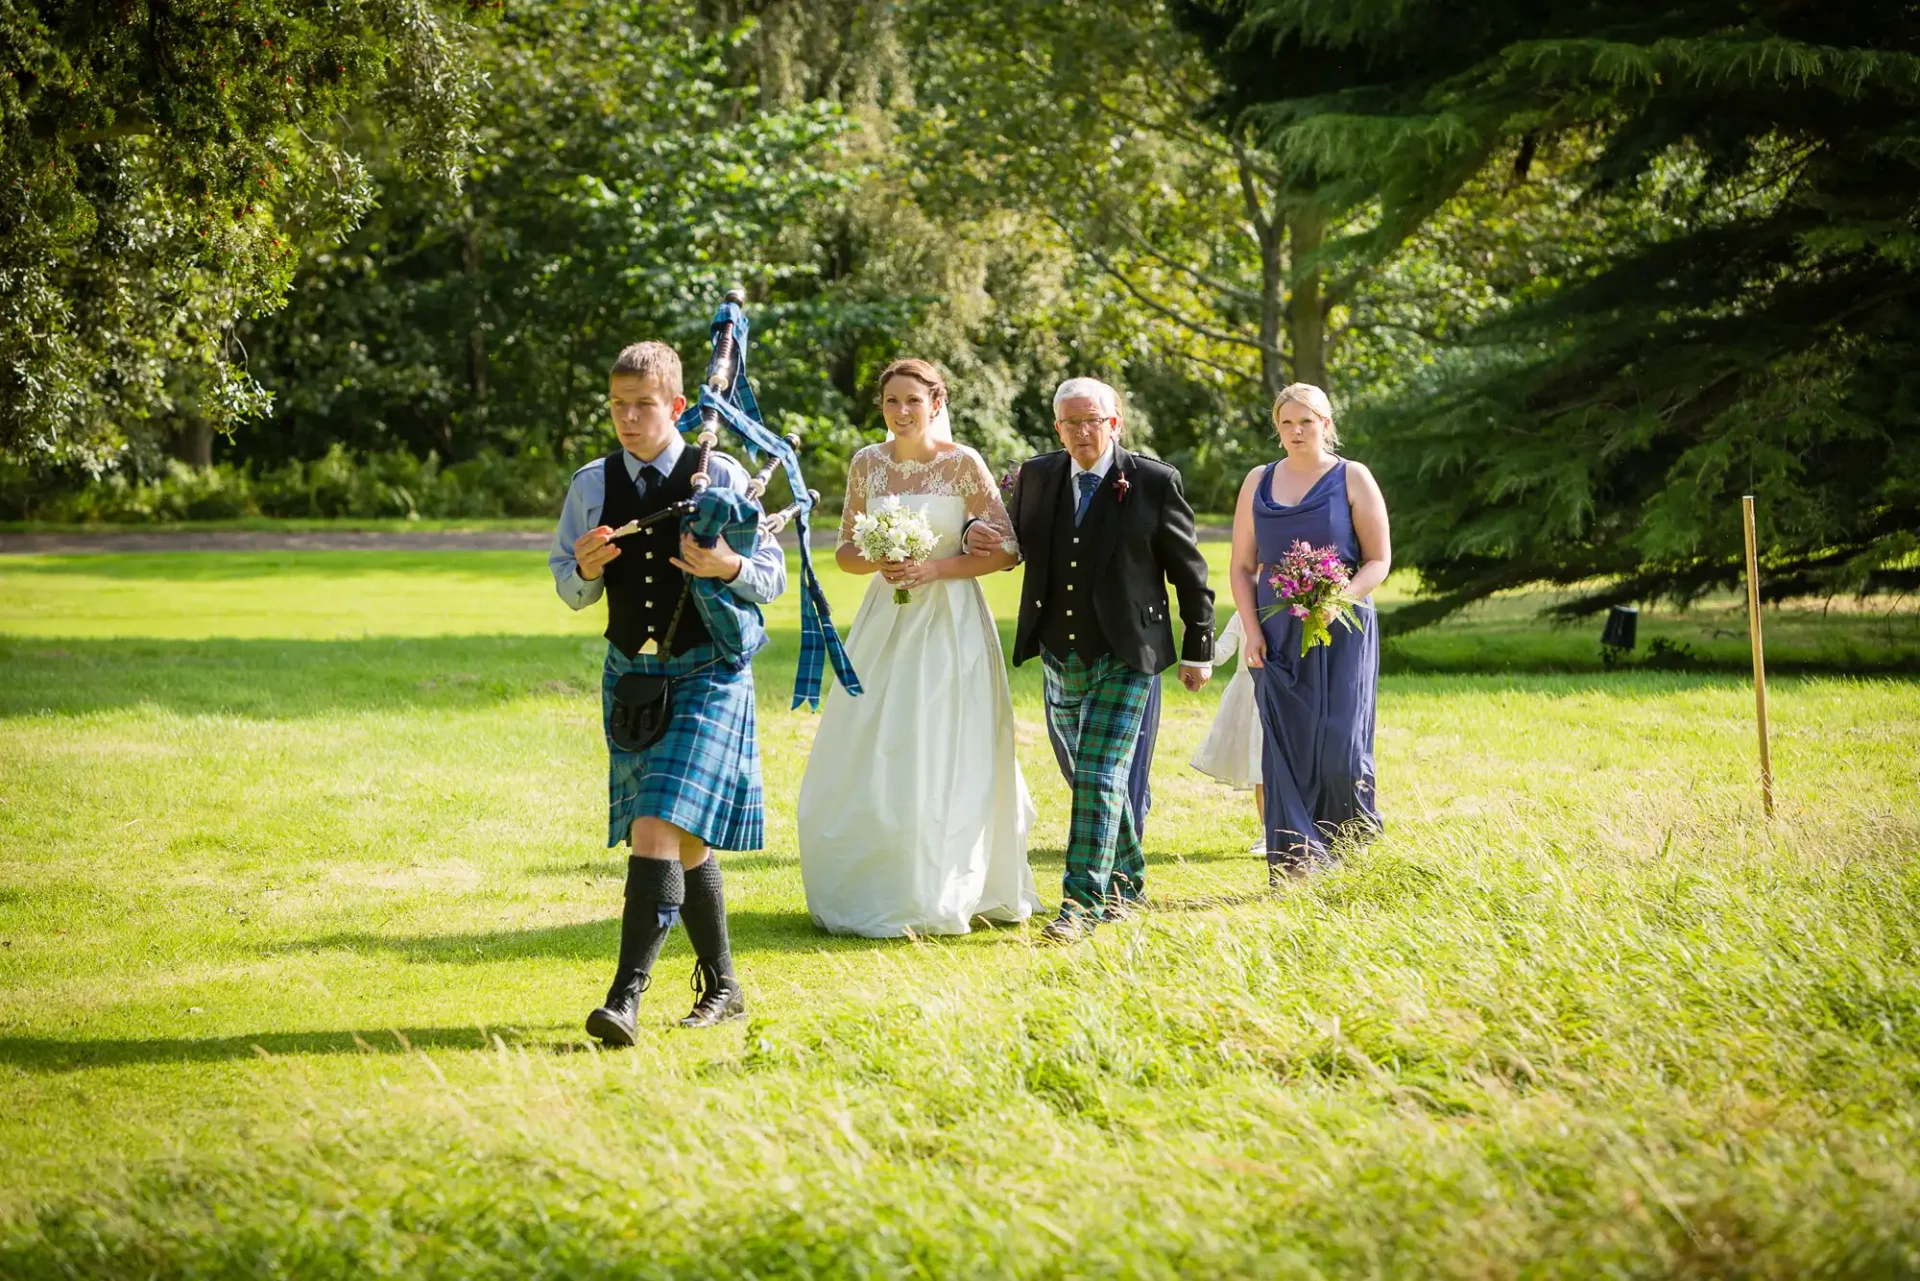 A wedding procession in a park with a bagpiper in a kilt leading a bride and groom, followed by a bridesmaid.